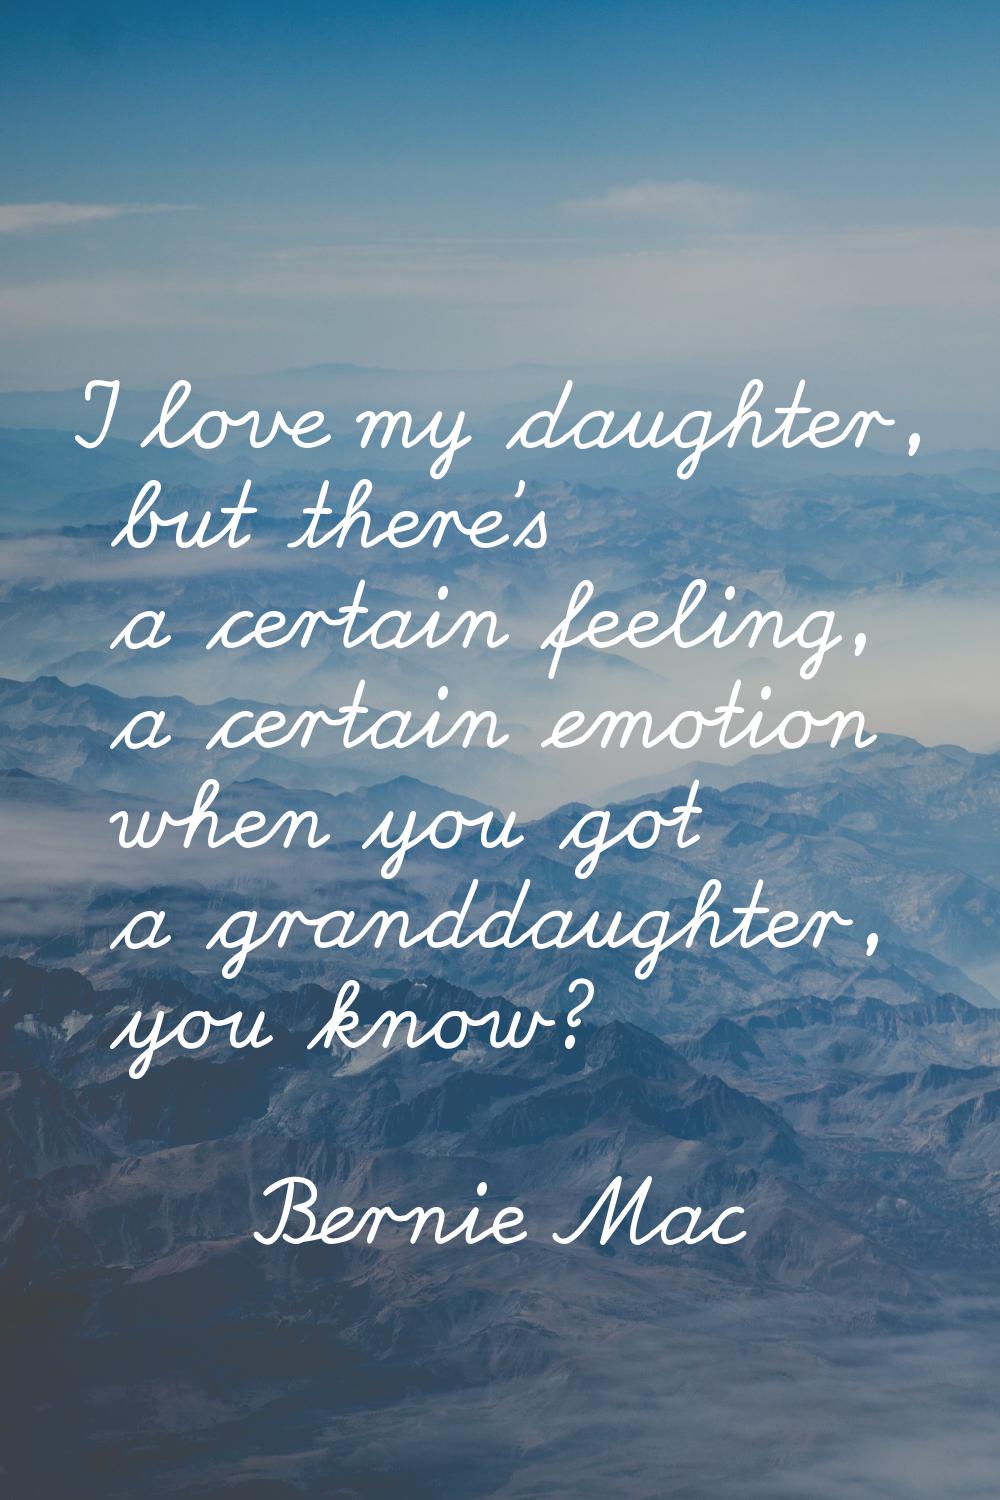 I love my daughter, but there's a certain feeling, a certain emotion when you got a granddaughter, 